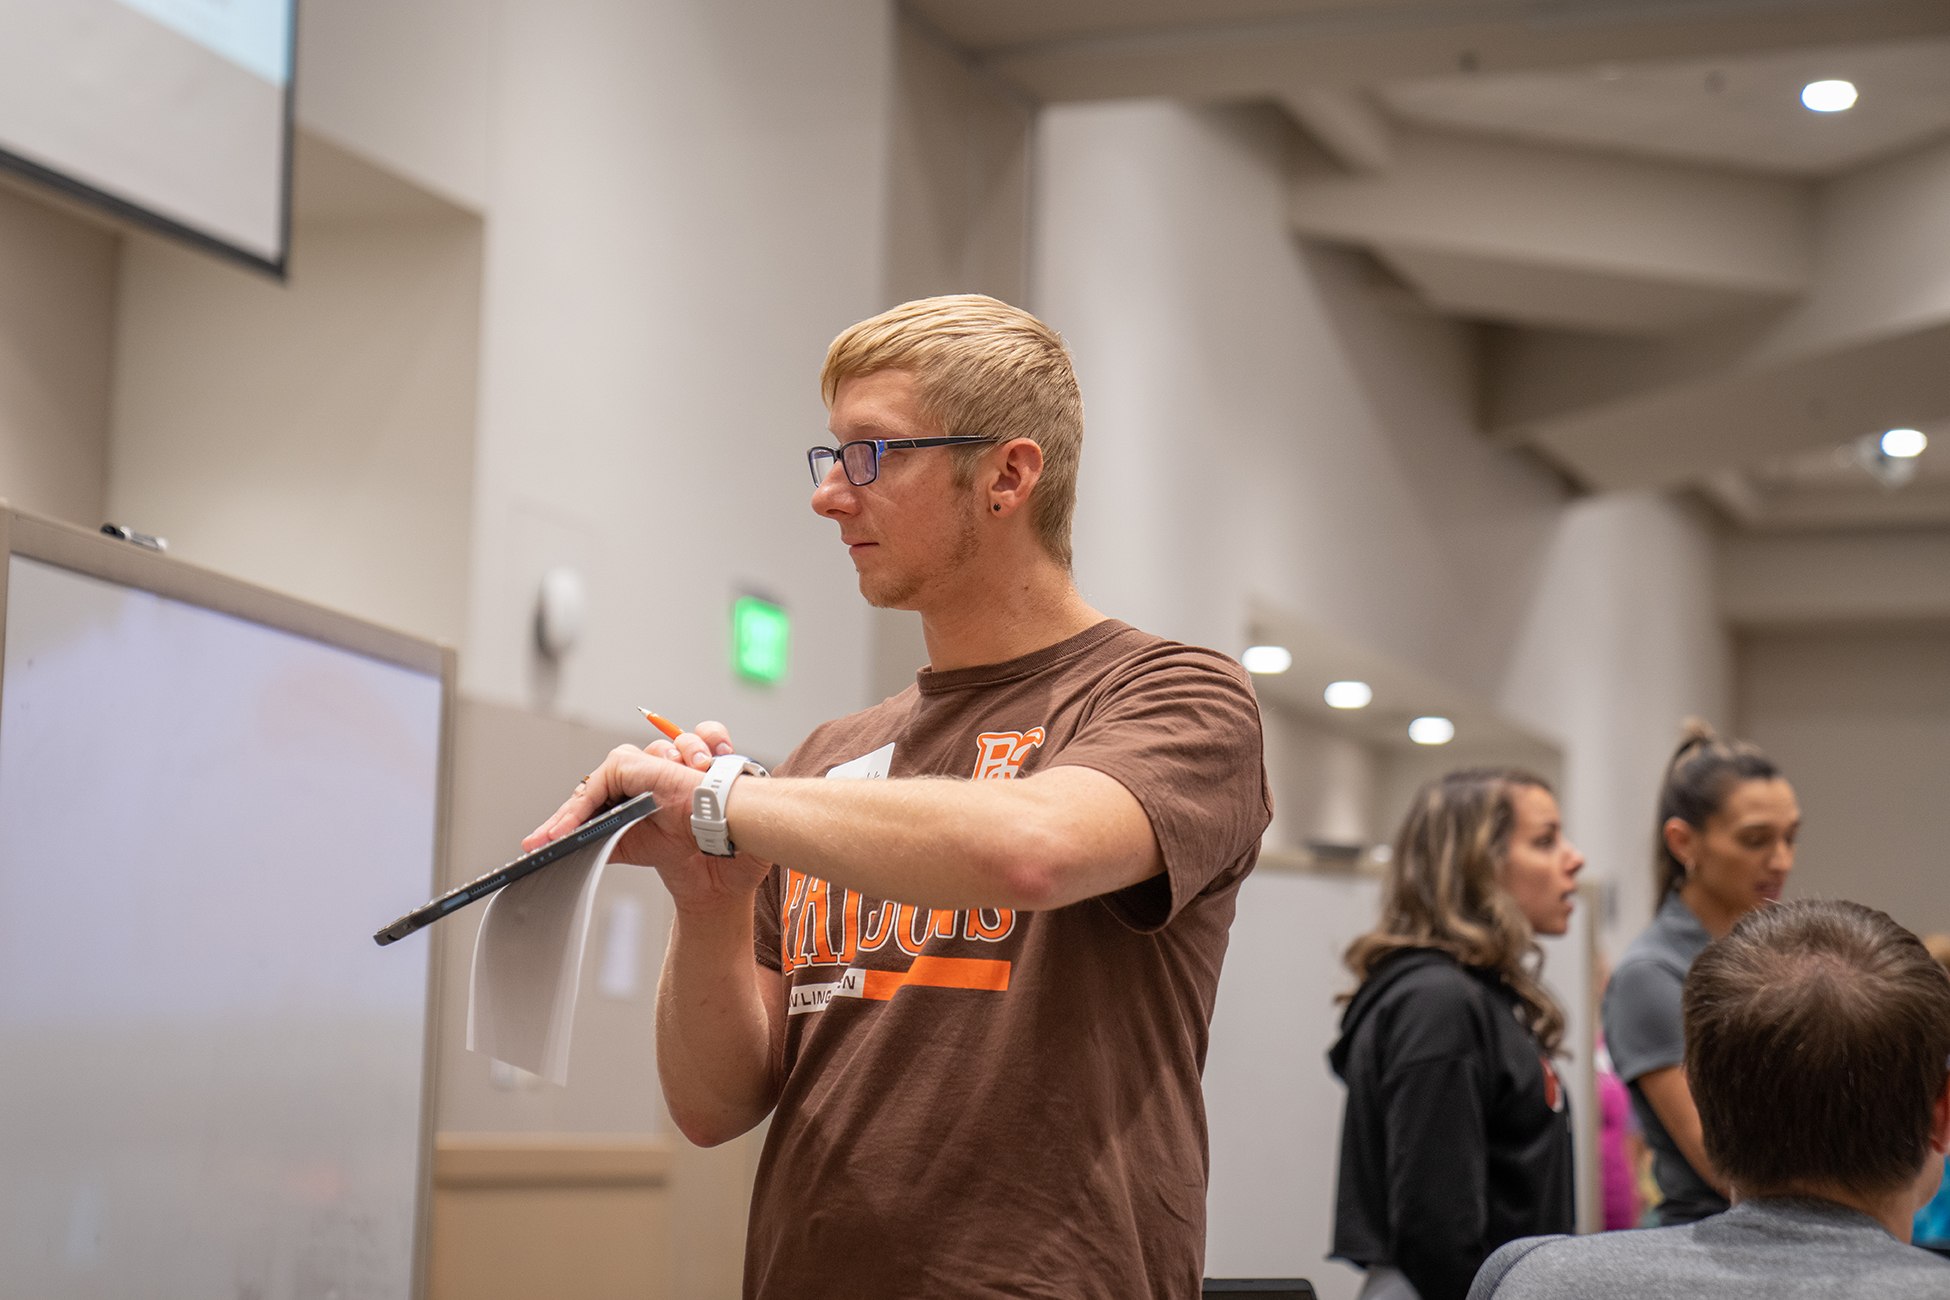 Garrett Spicer, physical therapist assistant, is grateful for the support network and small team approach of the new hybrid, accelerated DPT program at BGSU.